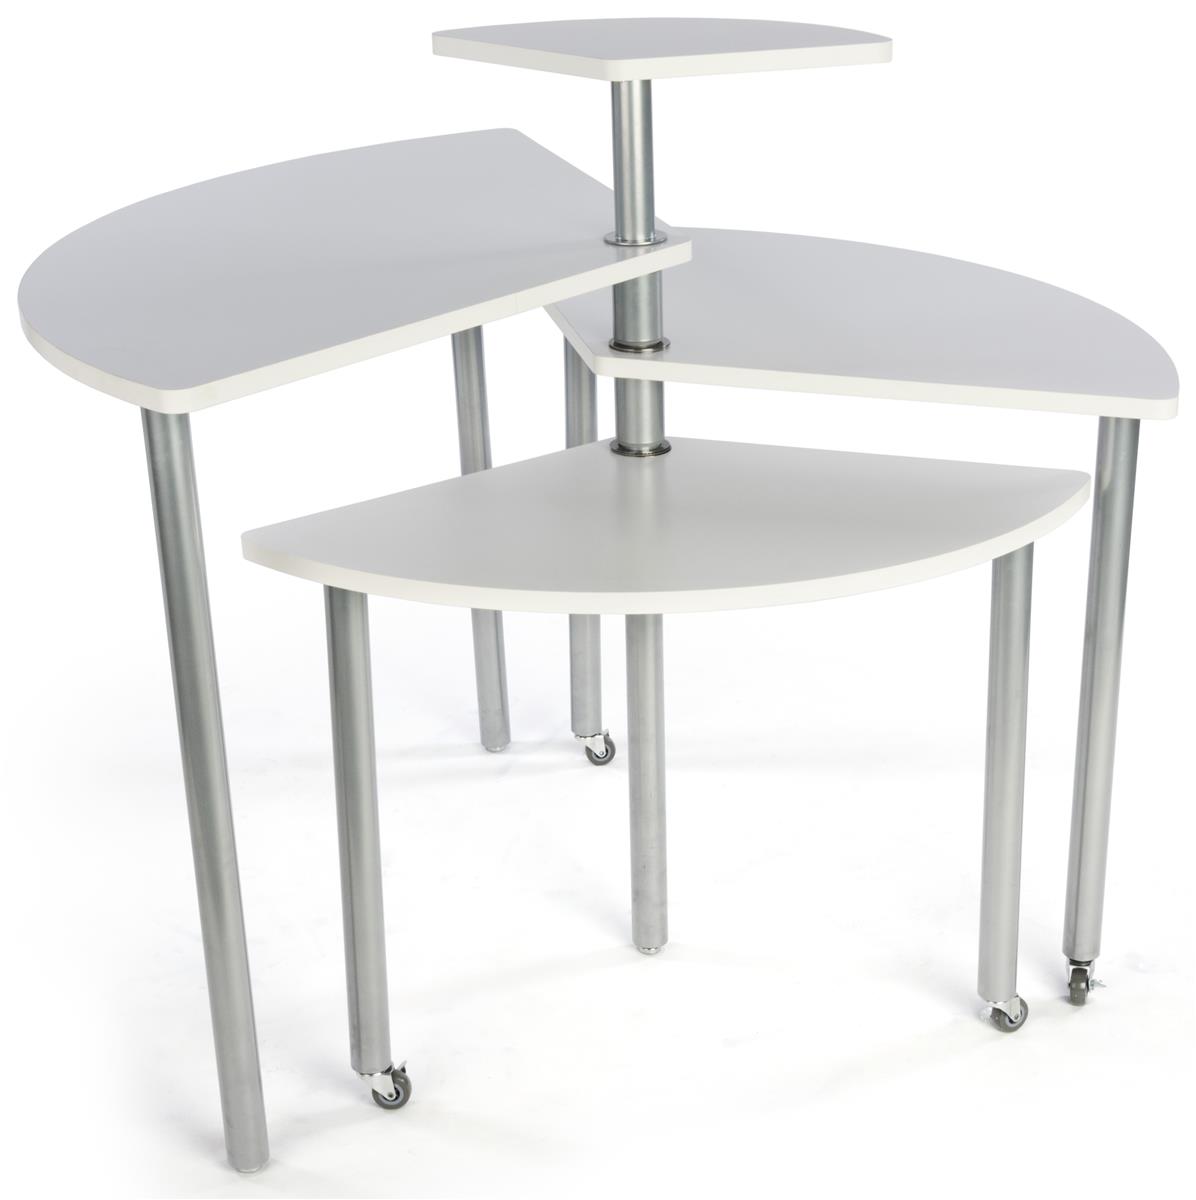 WHITE  & CHROME SMALL TWO TIER RETAIL STORE FIXTURE MERCHANDISE DISPLAY TABLE 